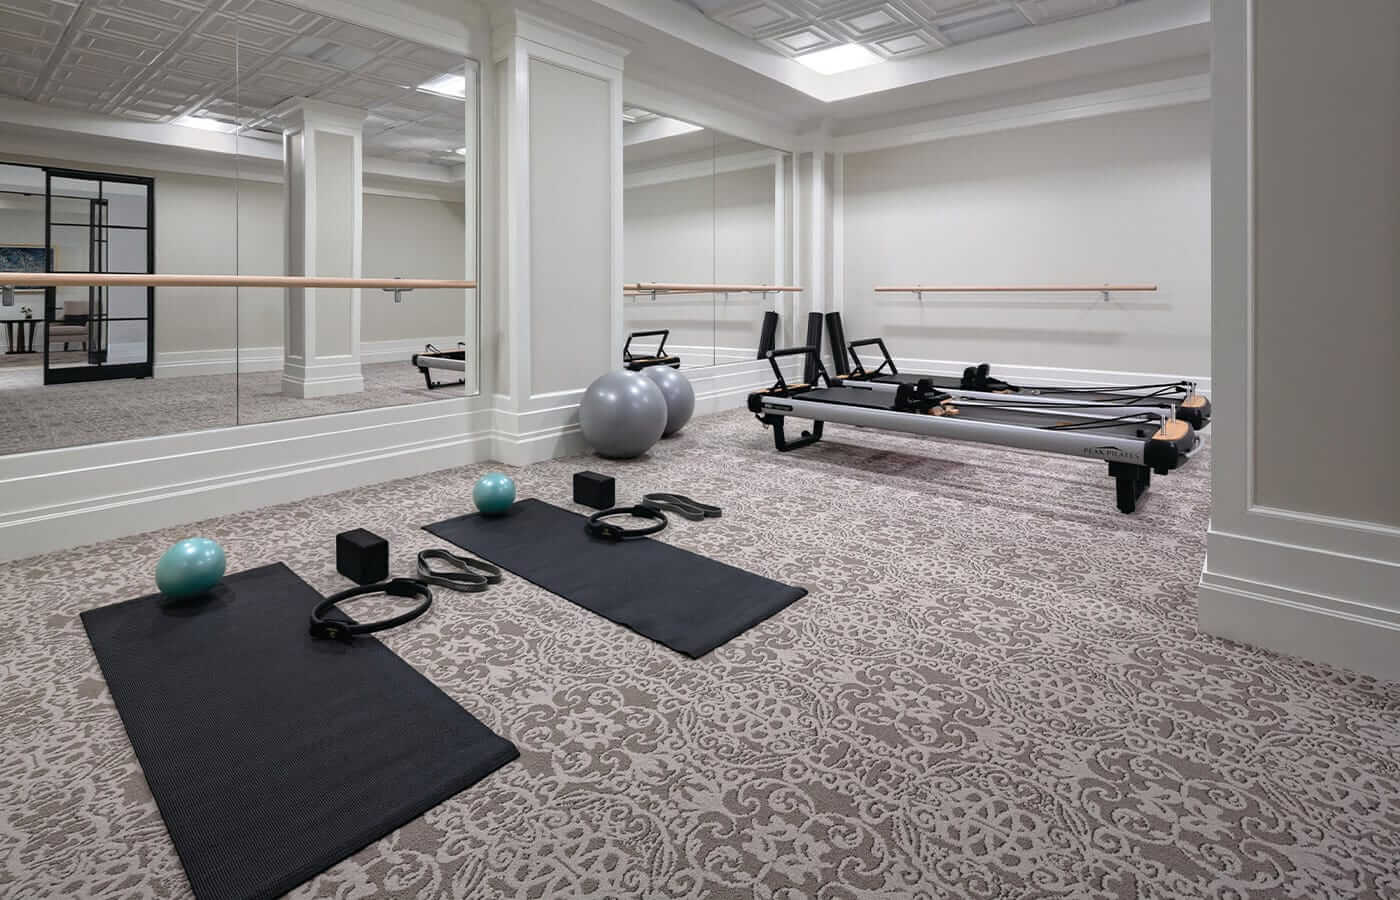 Fitness room at The Watermark at Brooklyn Heights.